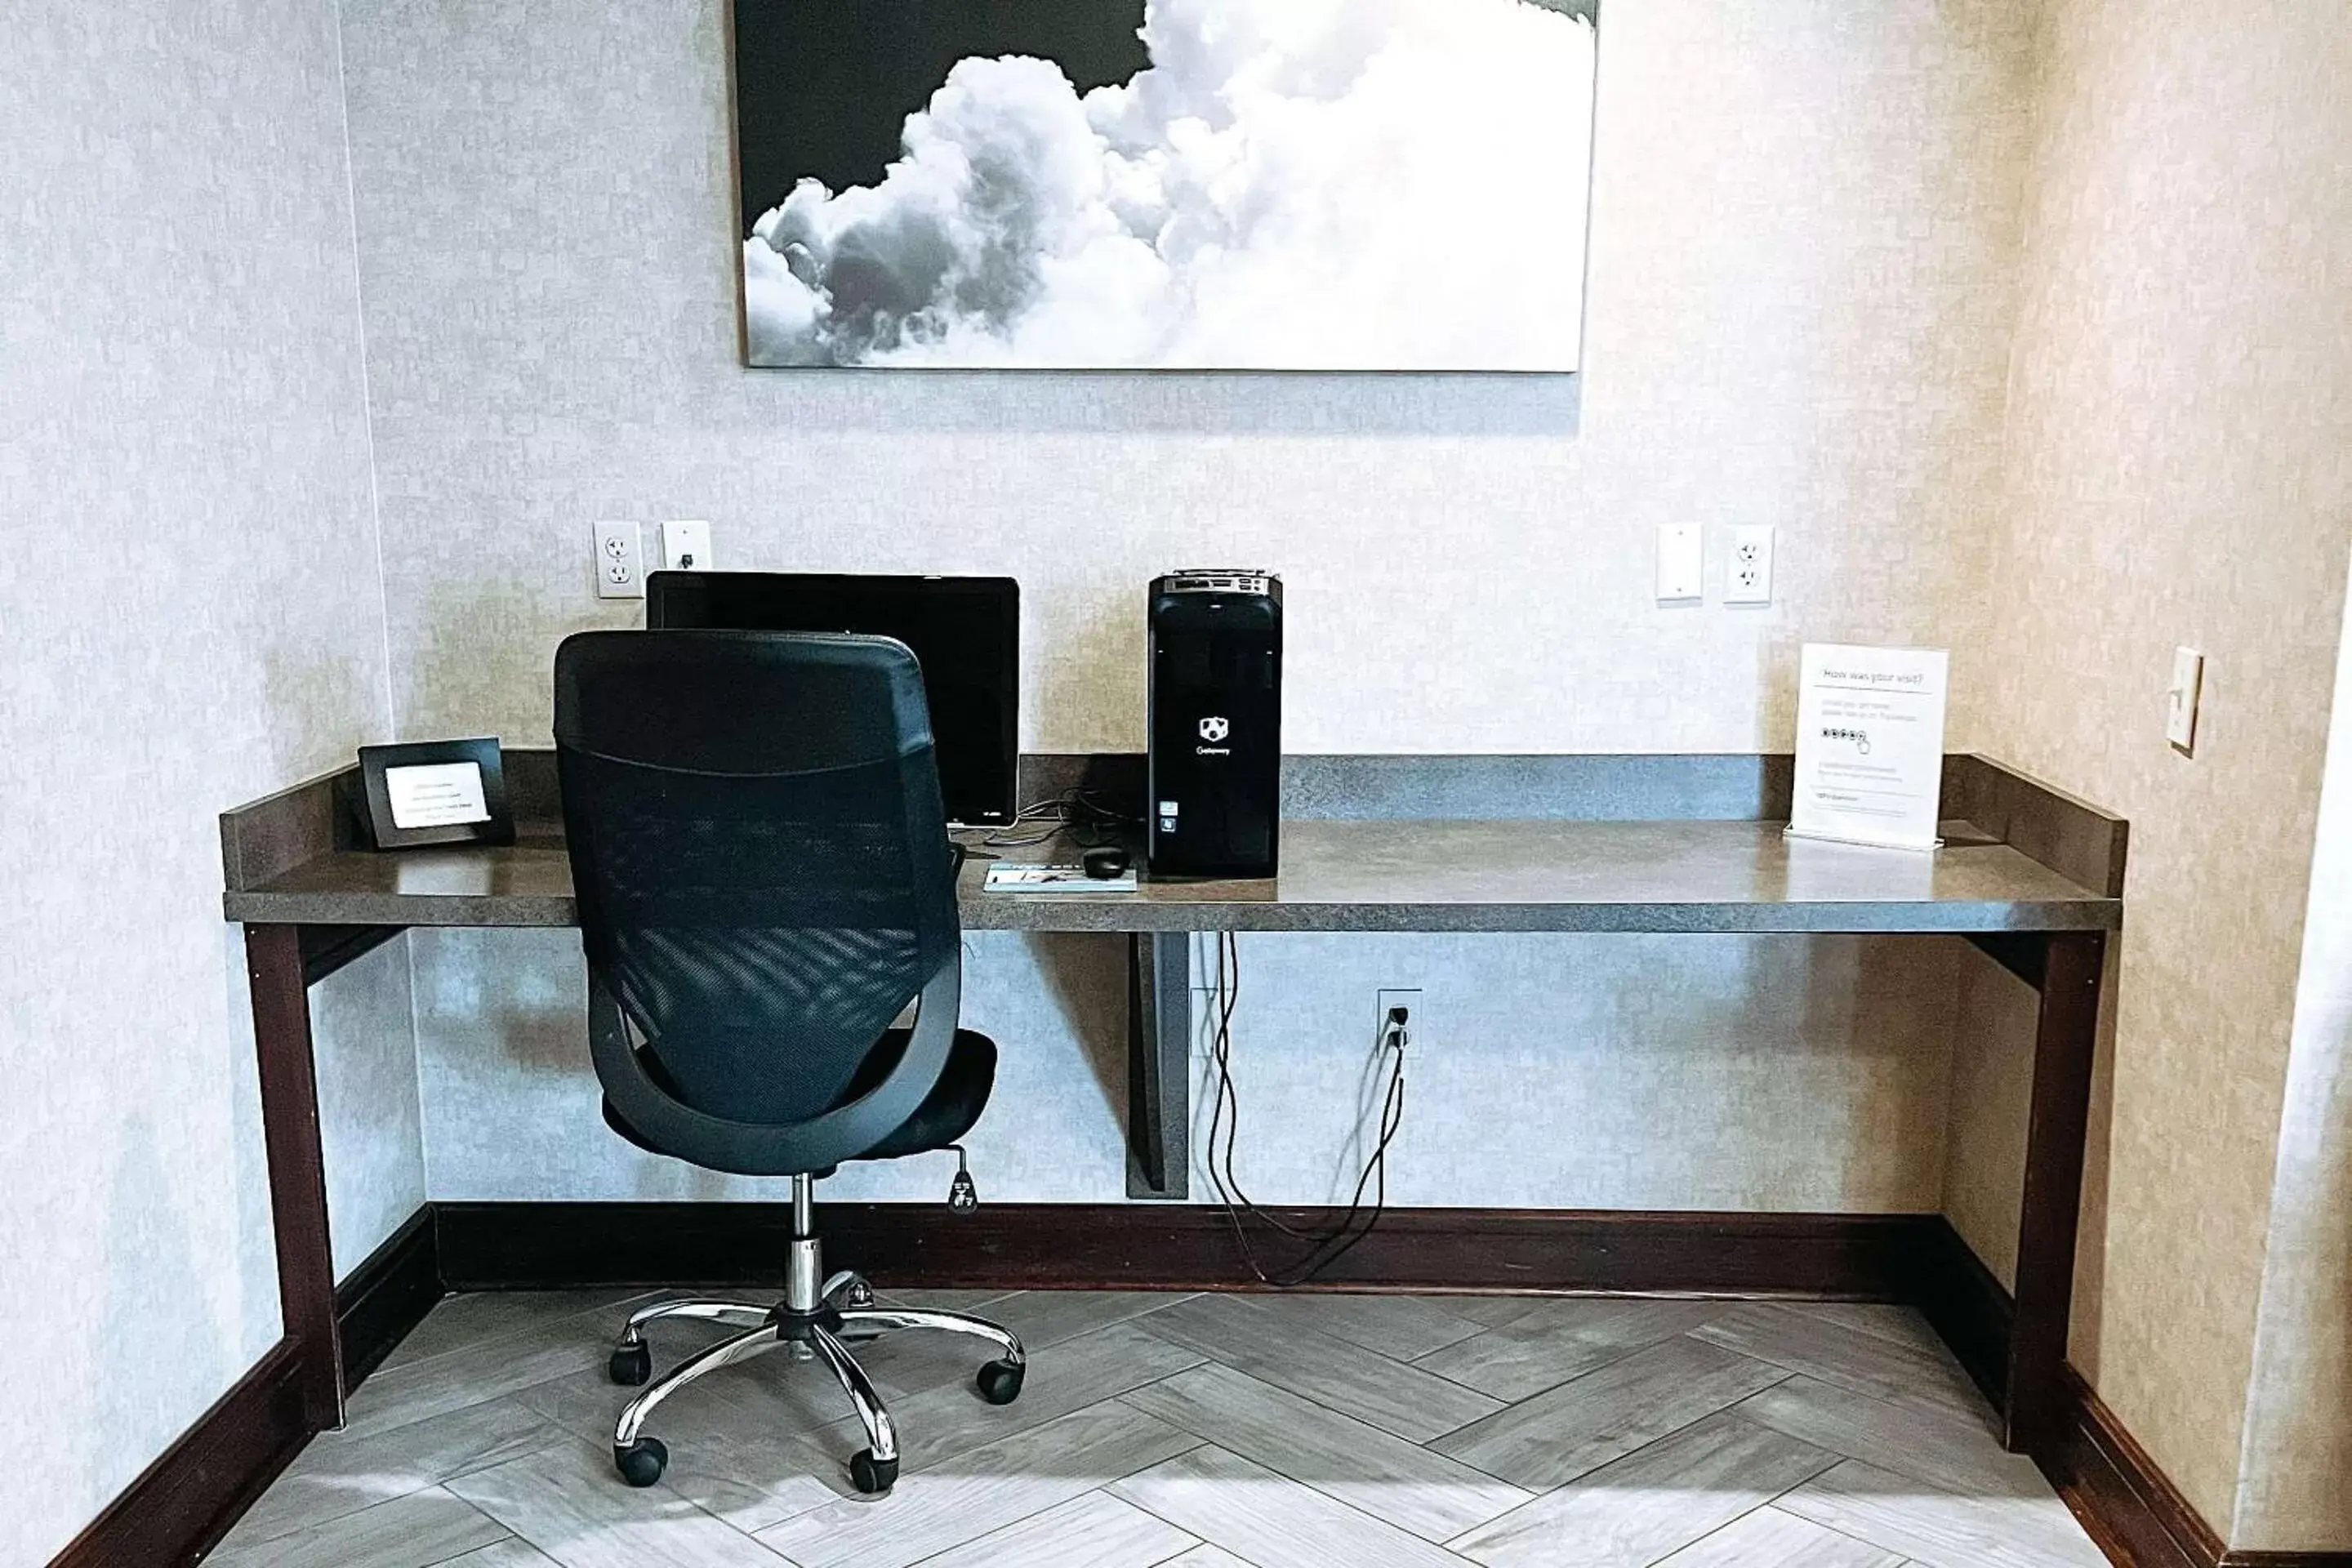 Business facilities in Quality Inn of Clarion